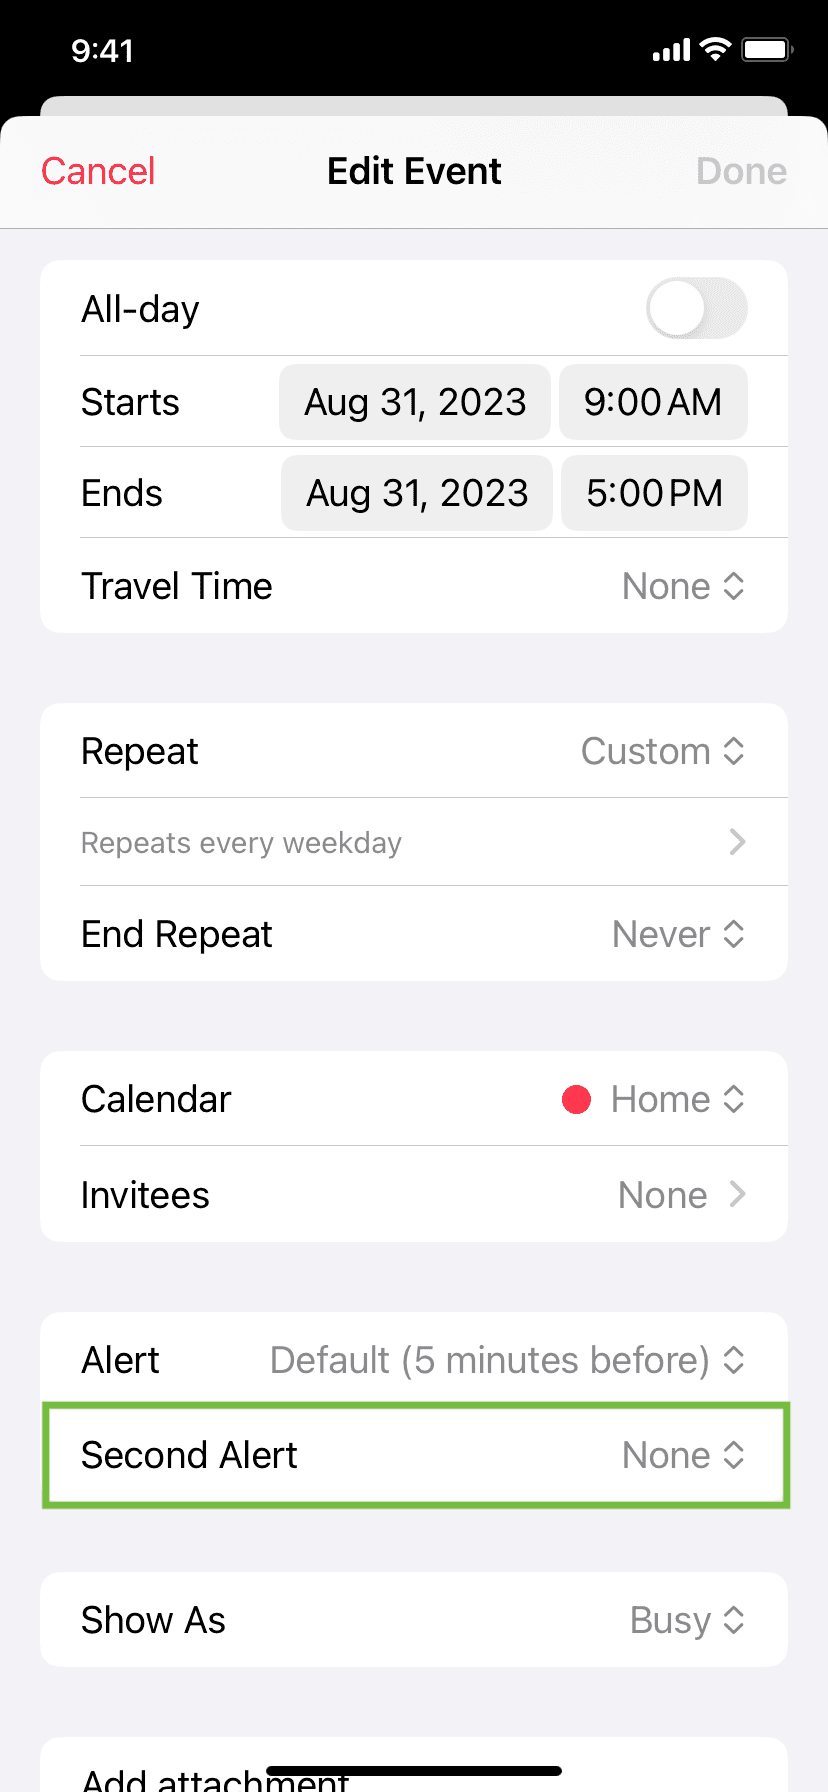 Second alert set to none for calendar event on iPhone